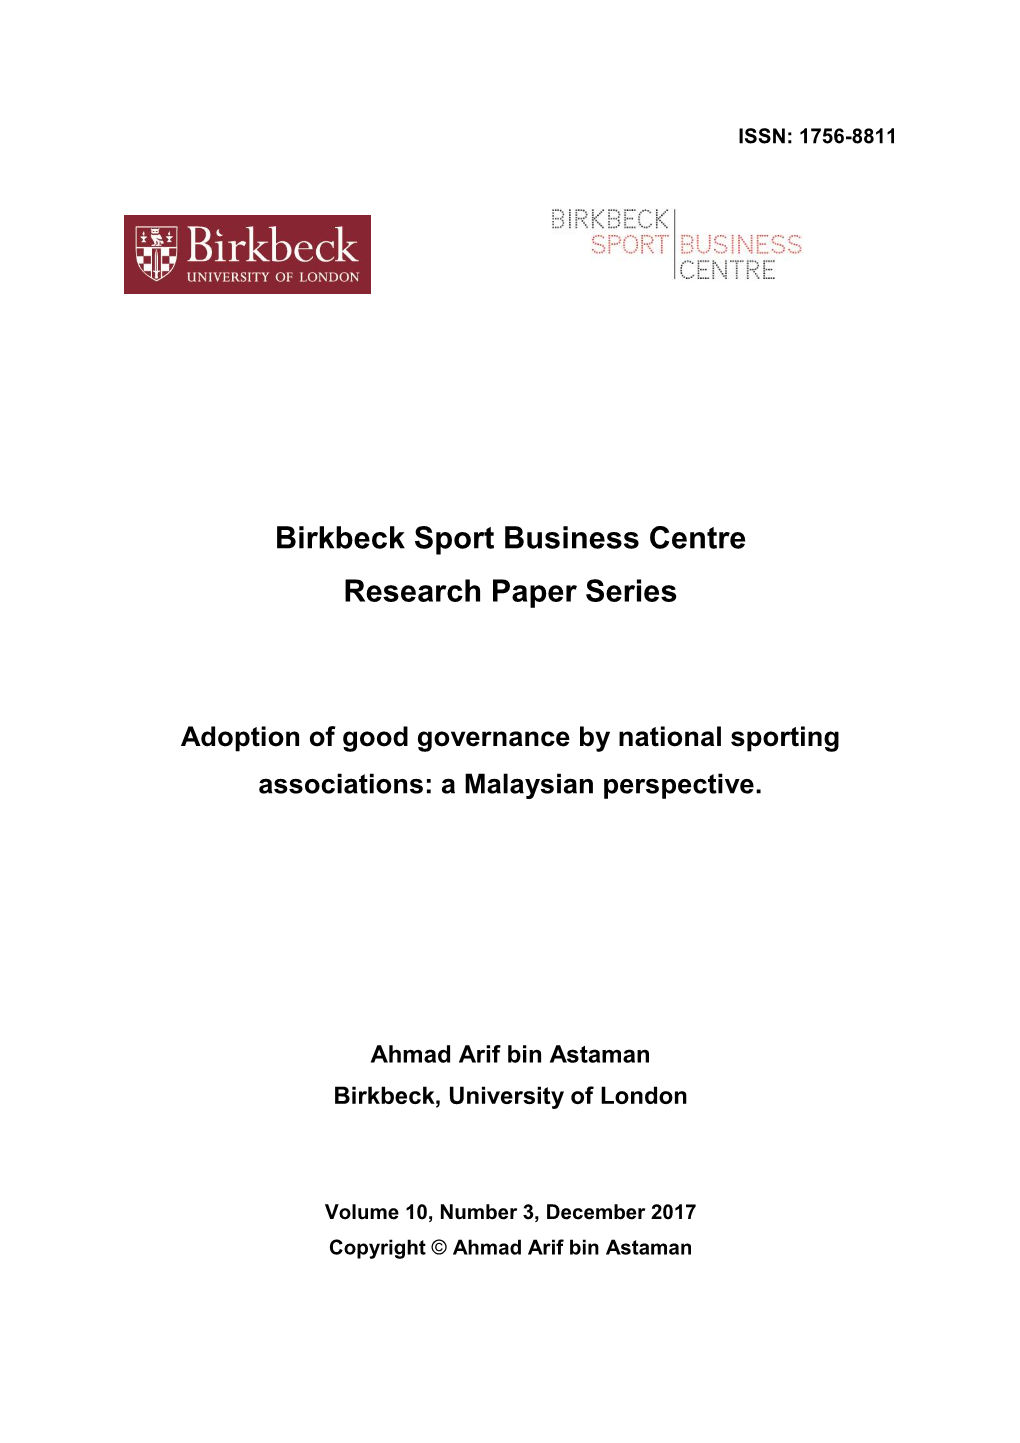 Birkbeck Sport Business Centre Research Paper Series Adoption of Good Governance by National Sporting Associations